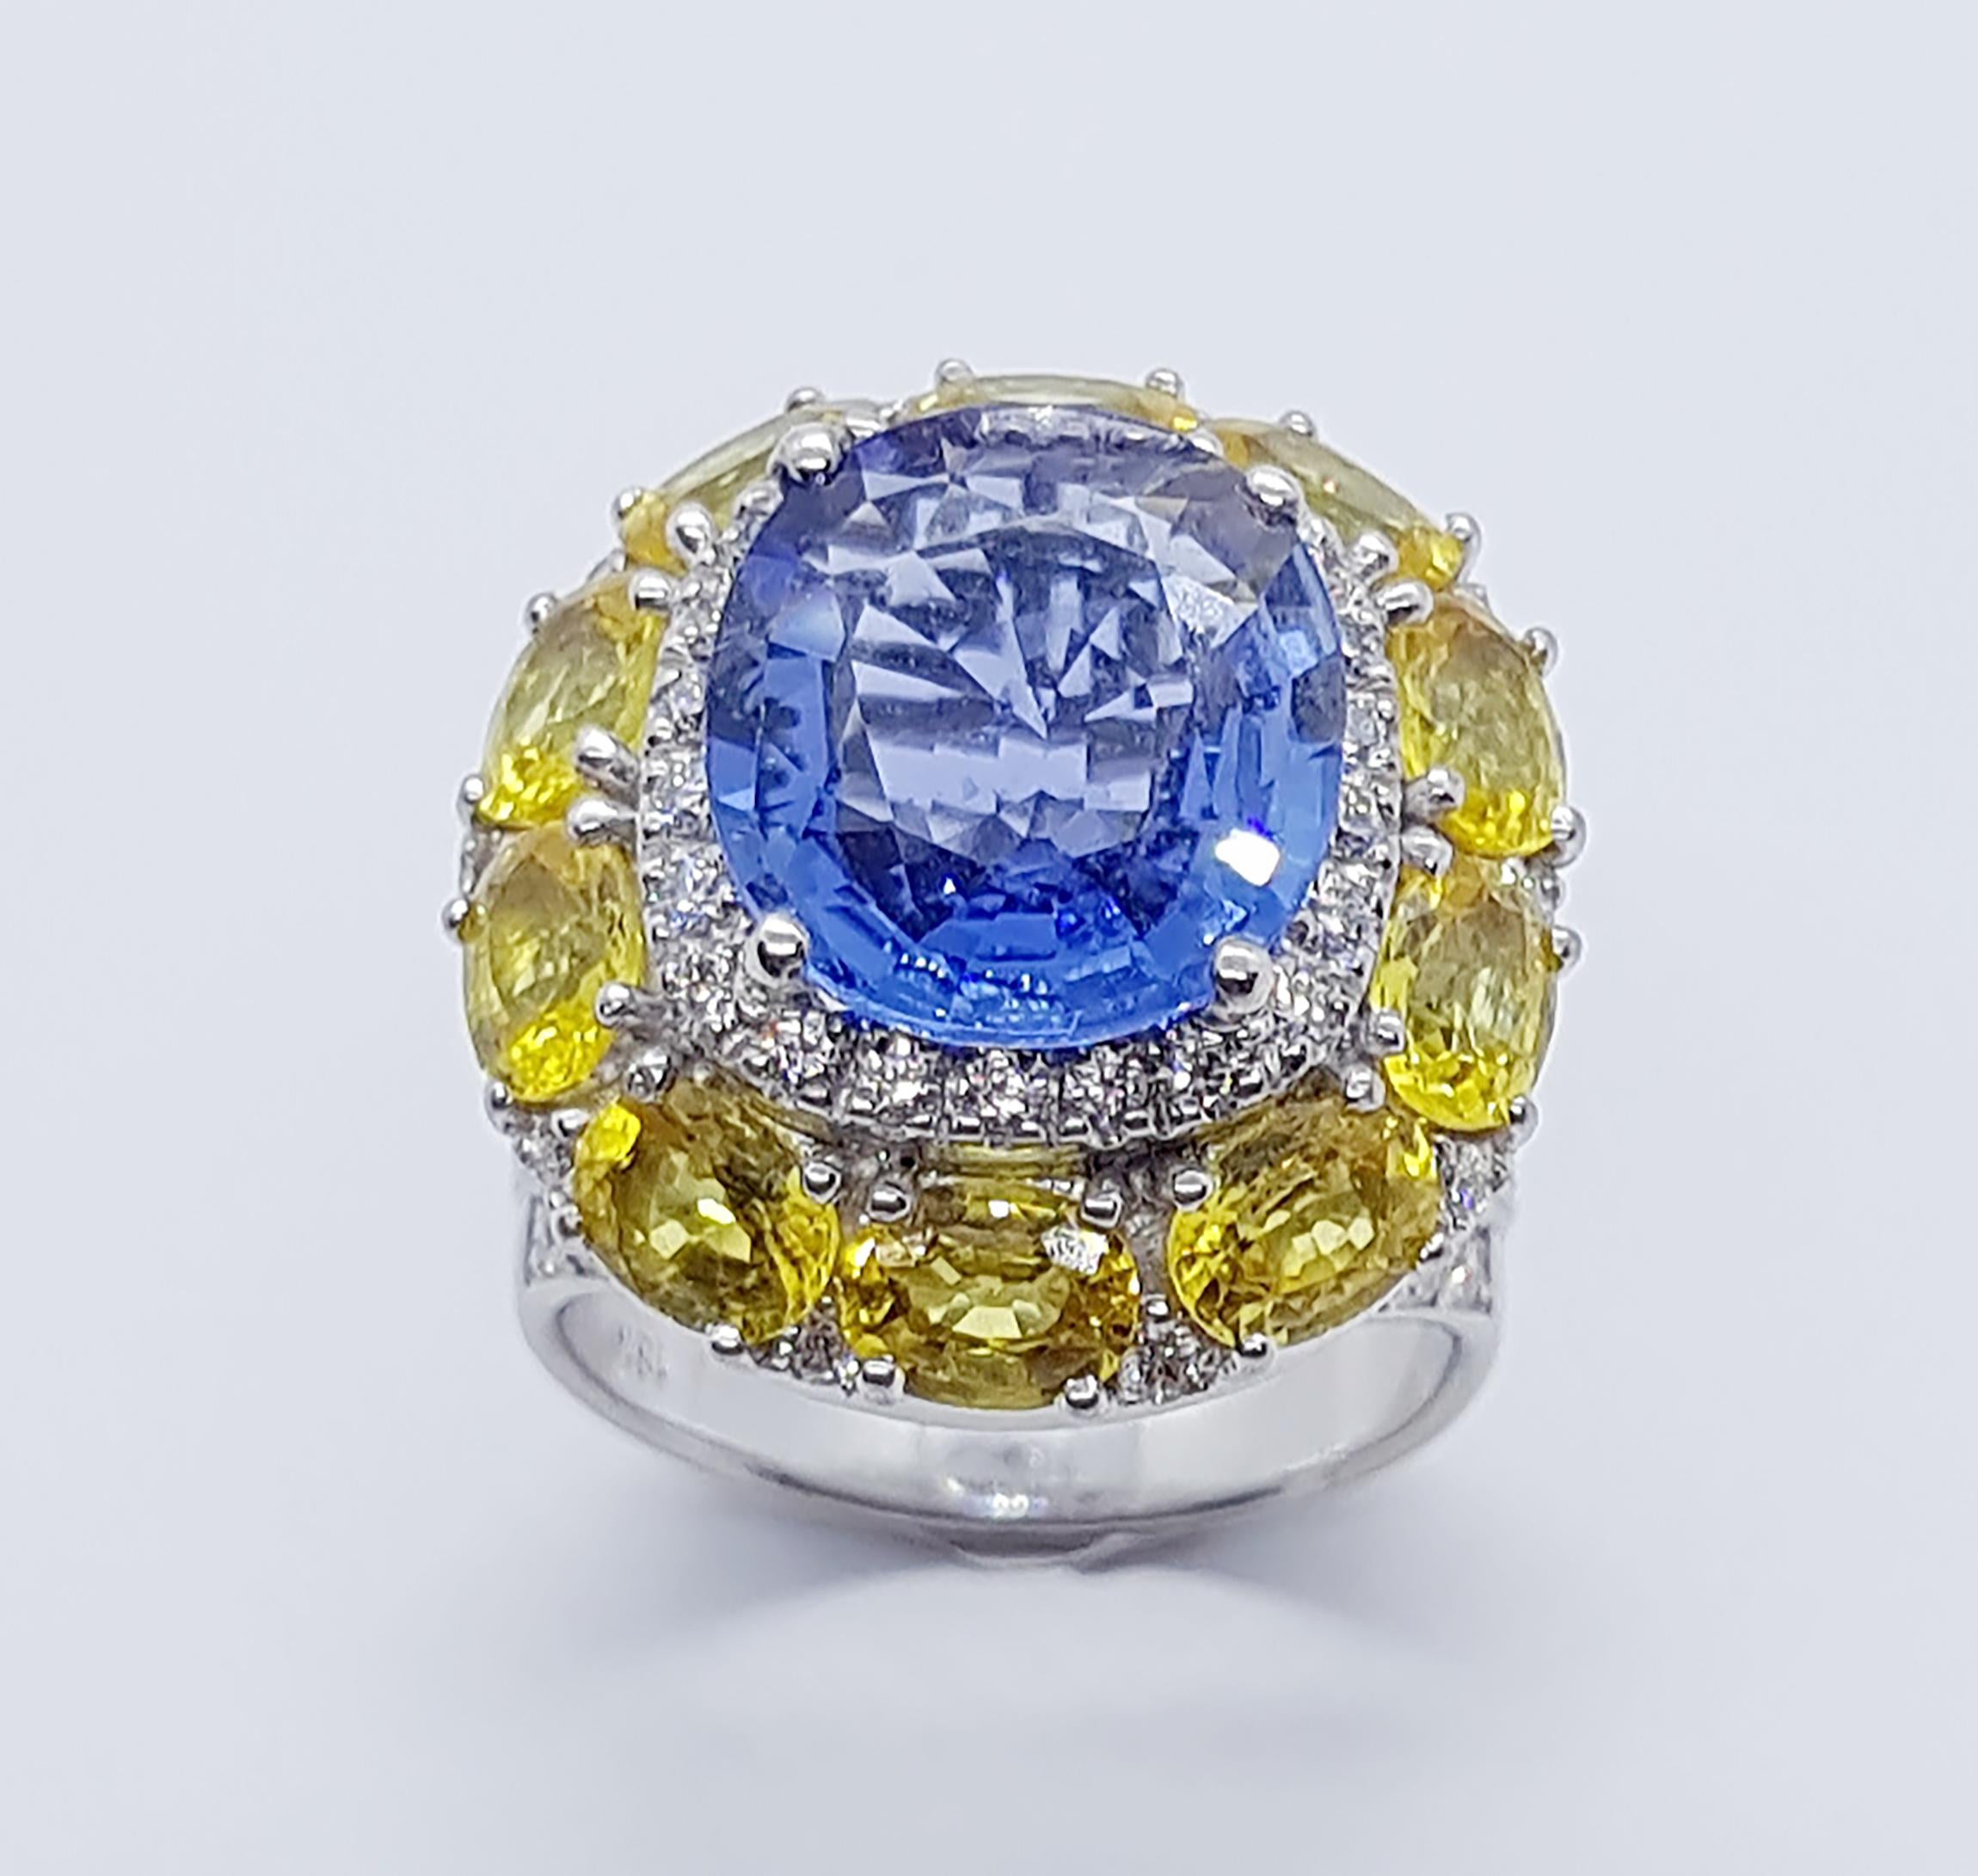 Blue Sapphire 5.27 carats with Yellow Sapphire 6.75 carats and Diamond 0.90 carat Ring set in 18 Karat White Gold Settings

Width:  1.9 cm 
Length: 2.1 cm
Ring Size: 52
Total Weight: 14.81 grams

